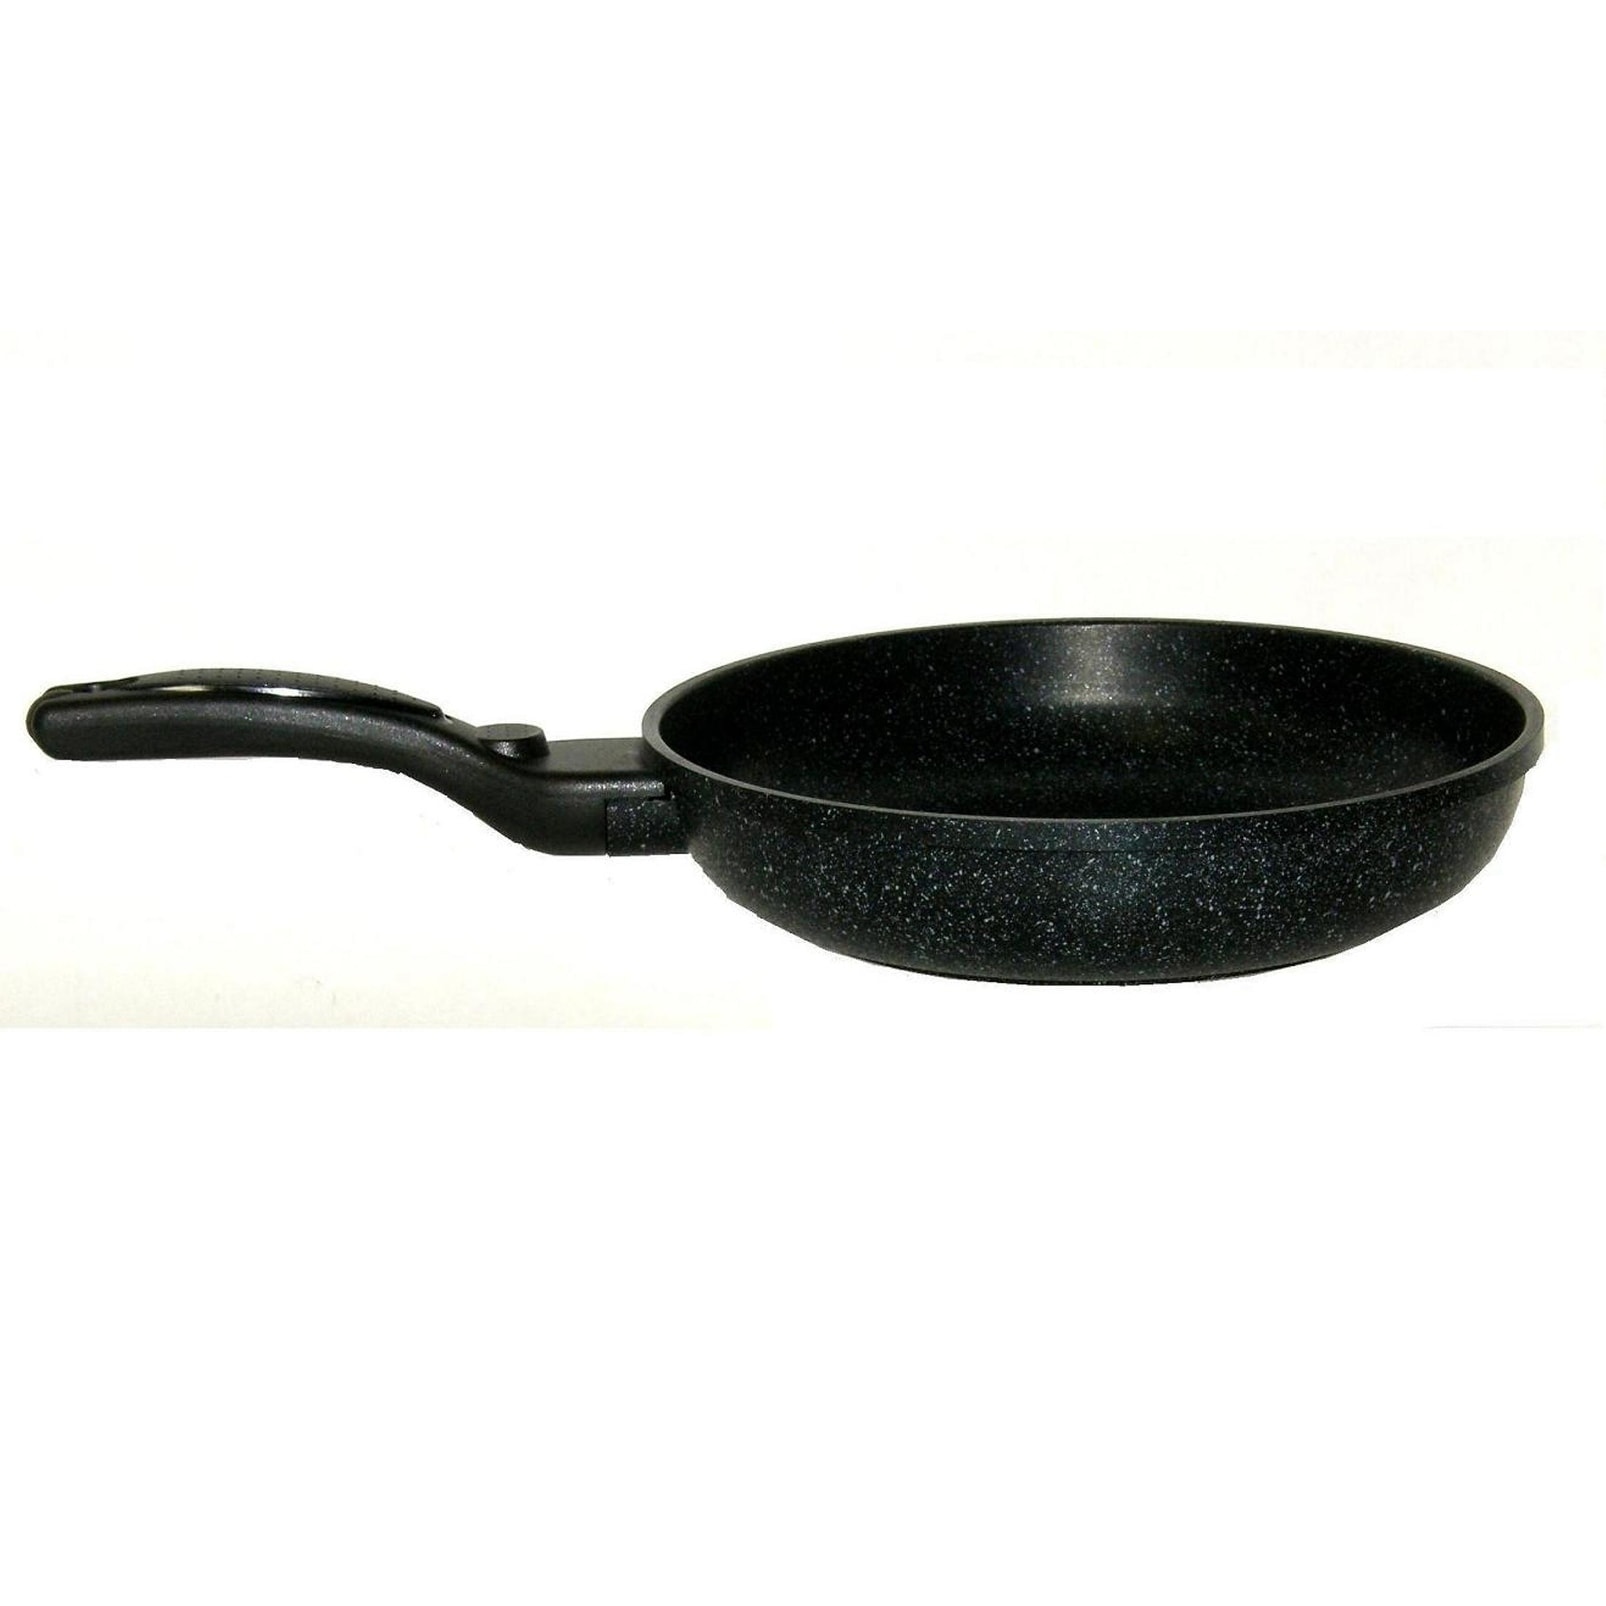 Cook N Home Marble Nonstick Cookware Saute, 10.5 inch Fry Pan with Lid, Black